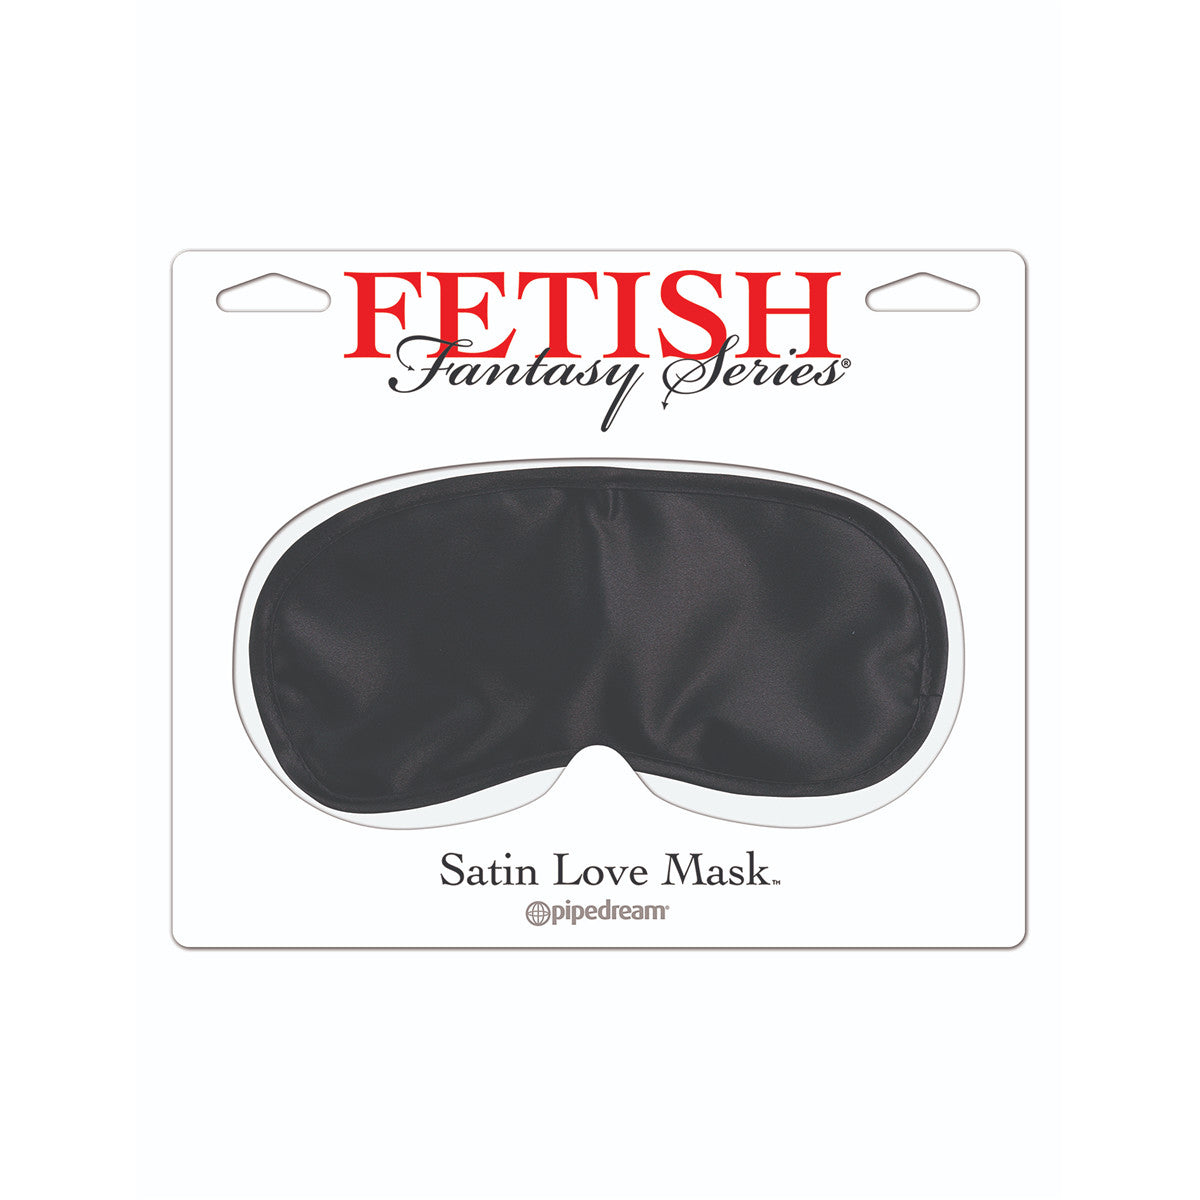 Fetish Fantasy Series Satin Love Mask - Black - Thorn & Feather Sex Toy Canada